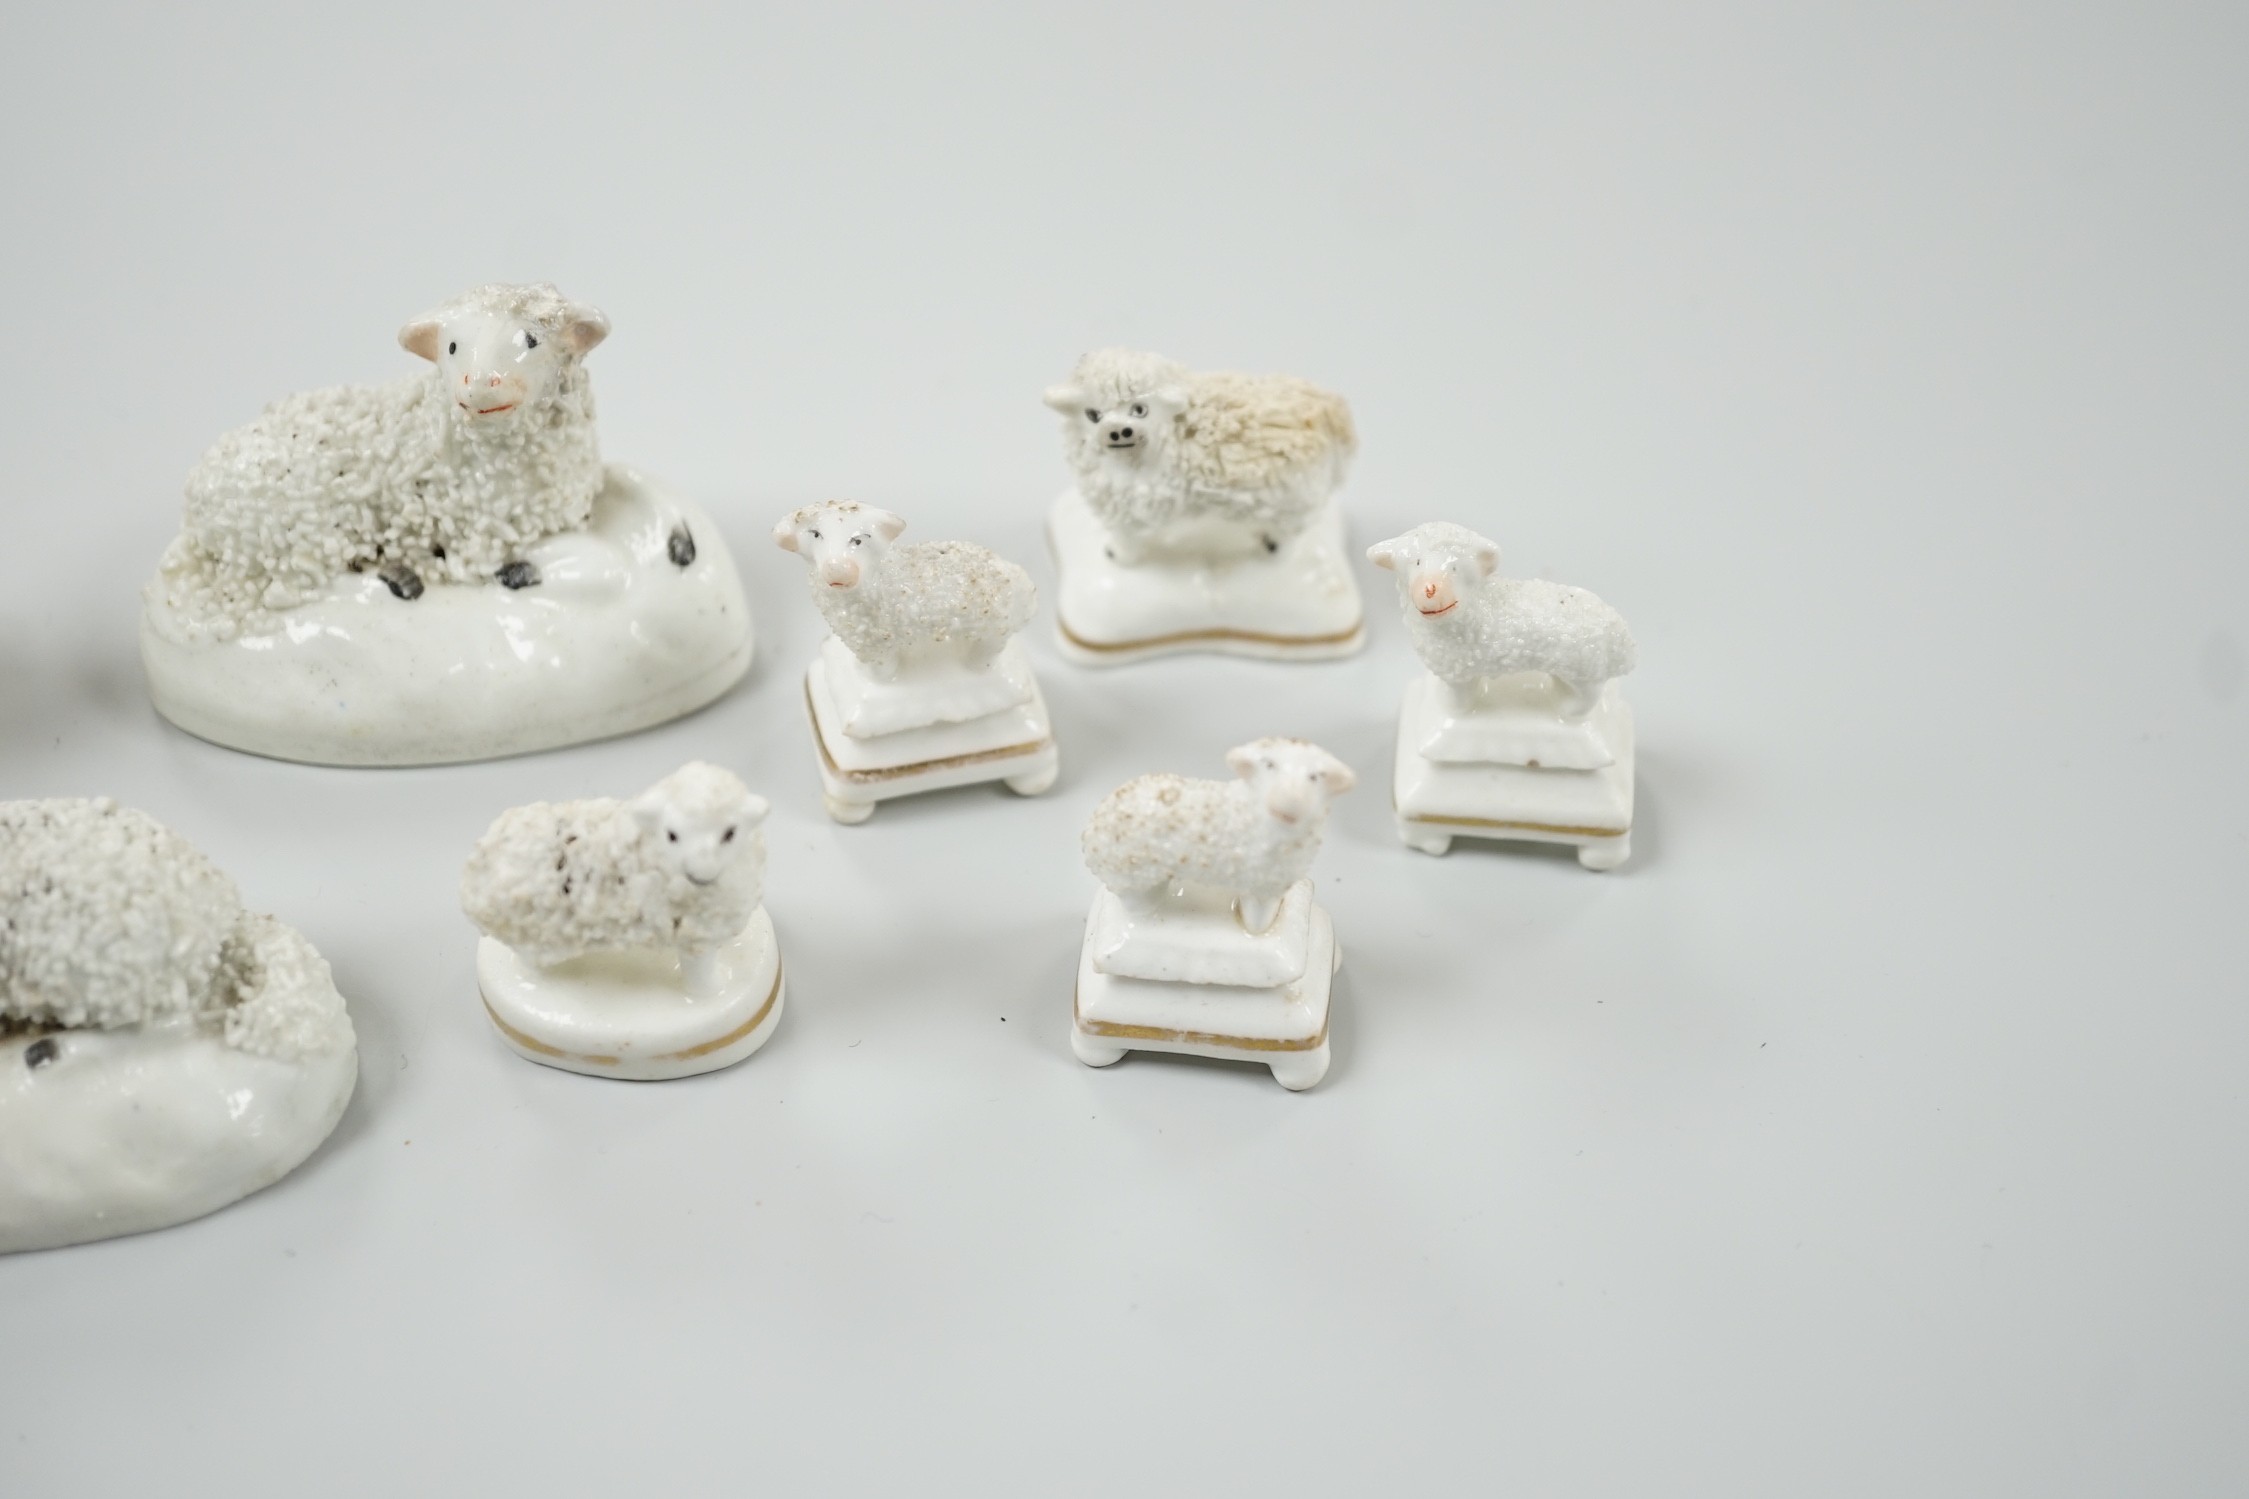 Three small Staffordshire models of sheep, together with five toy Staffordshire models of sheep, c.1830-50 (8). Tallest 5cm, Provenance: Dennis G.Rice collection